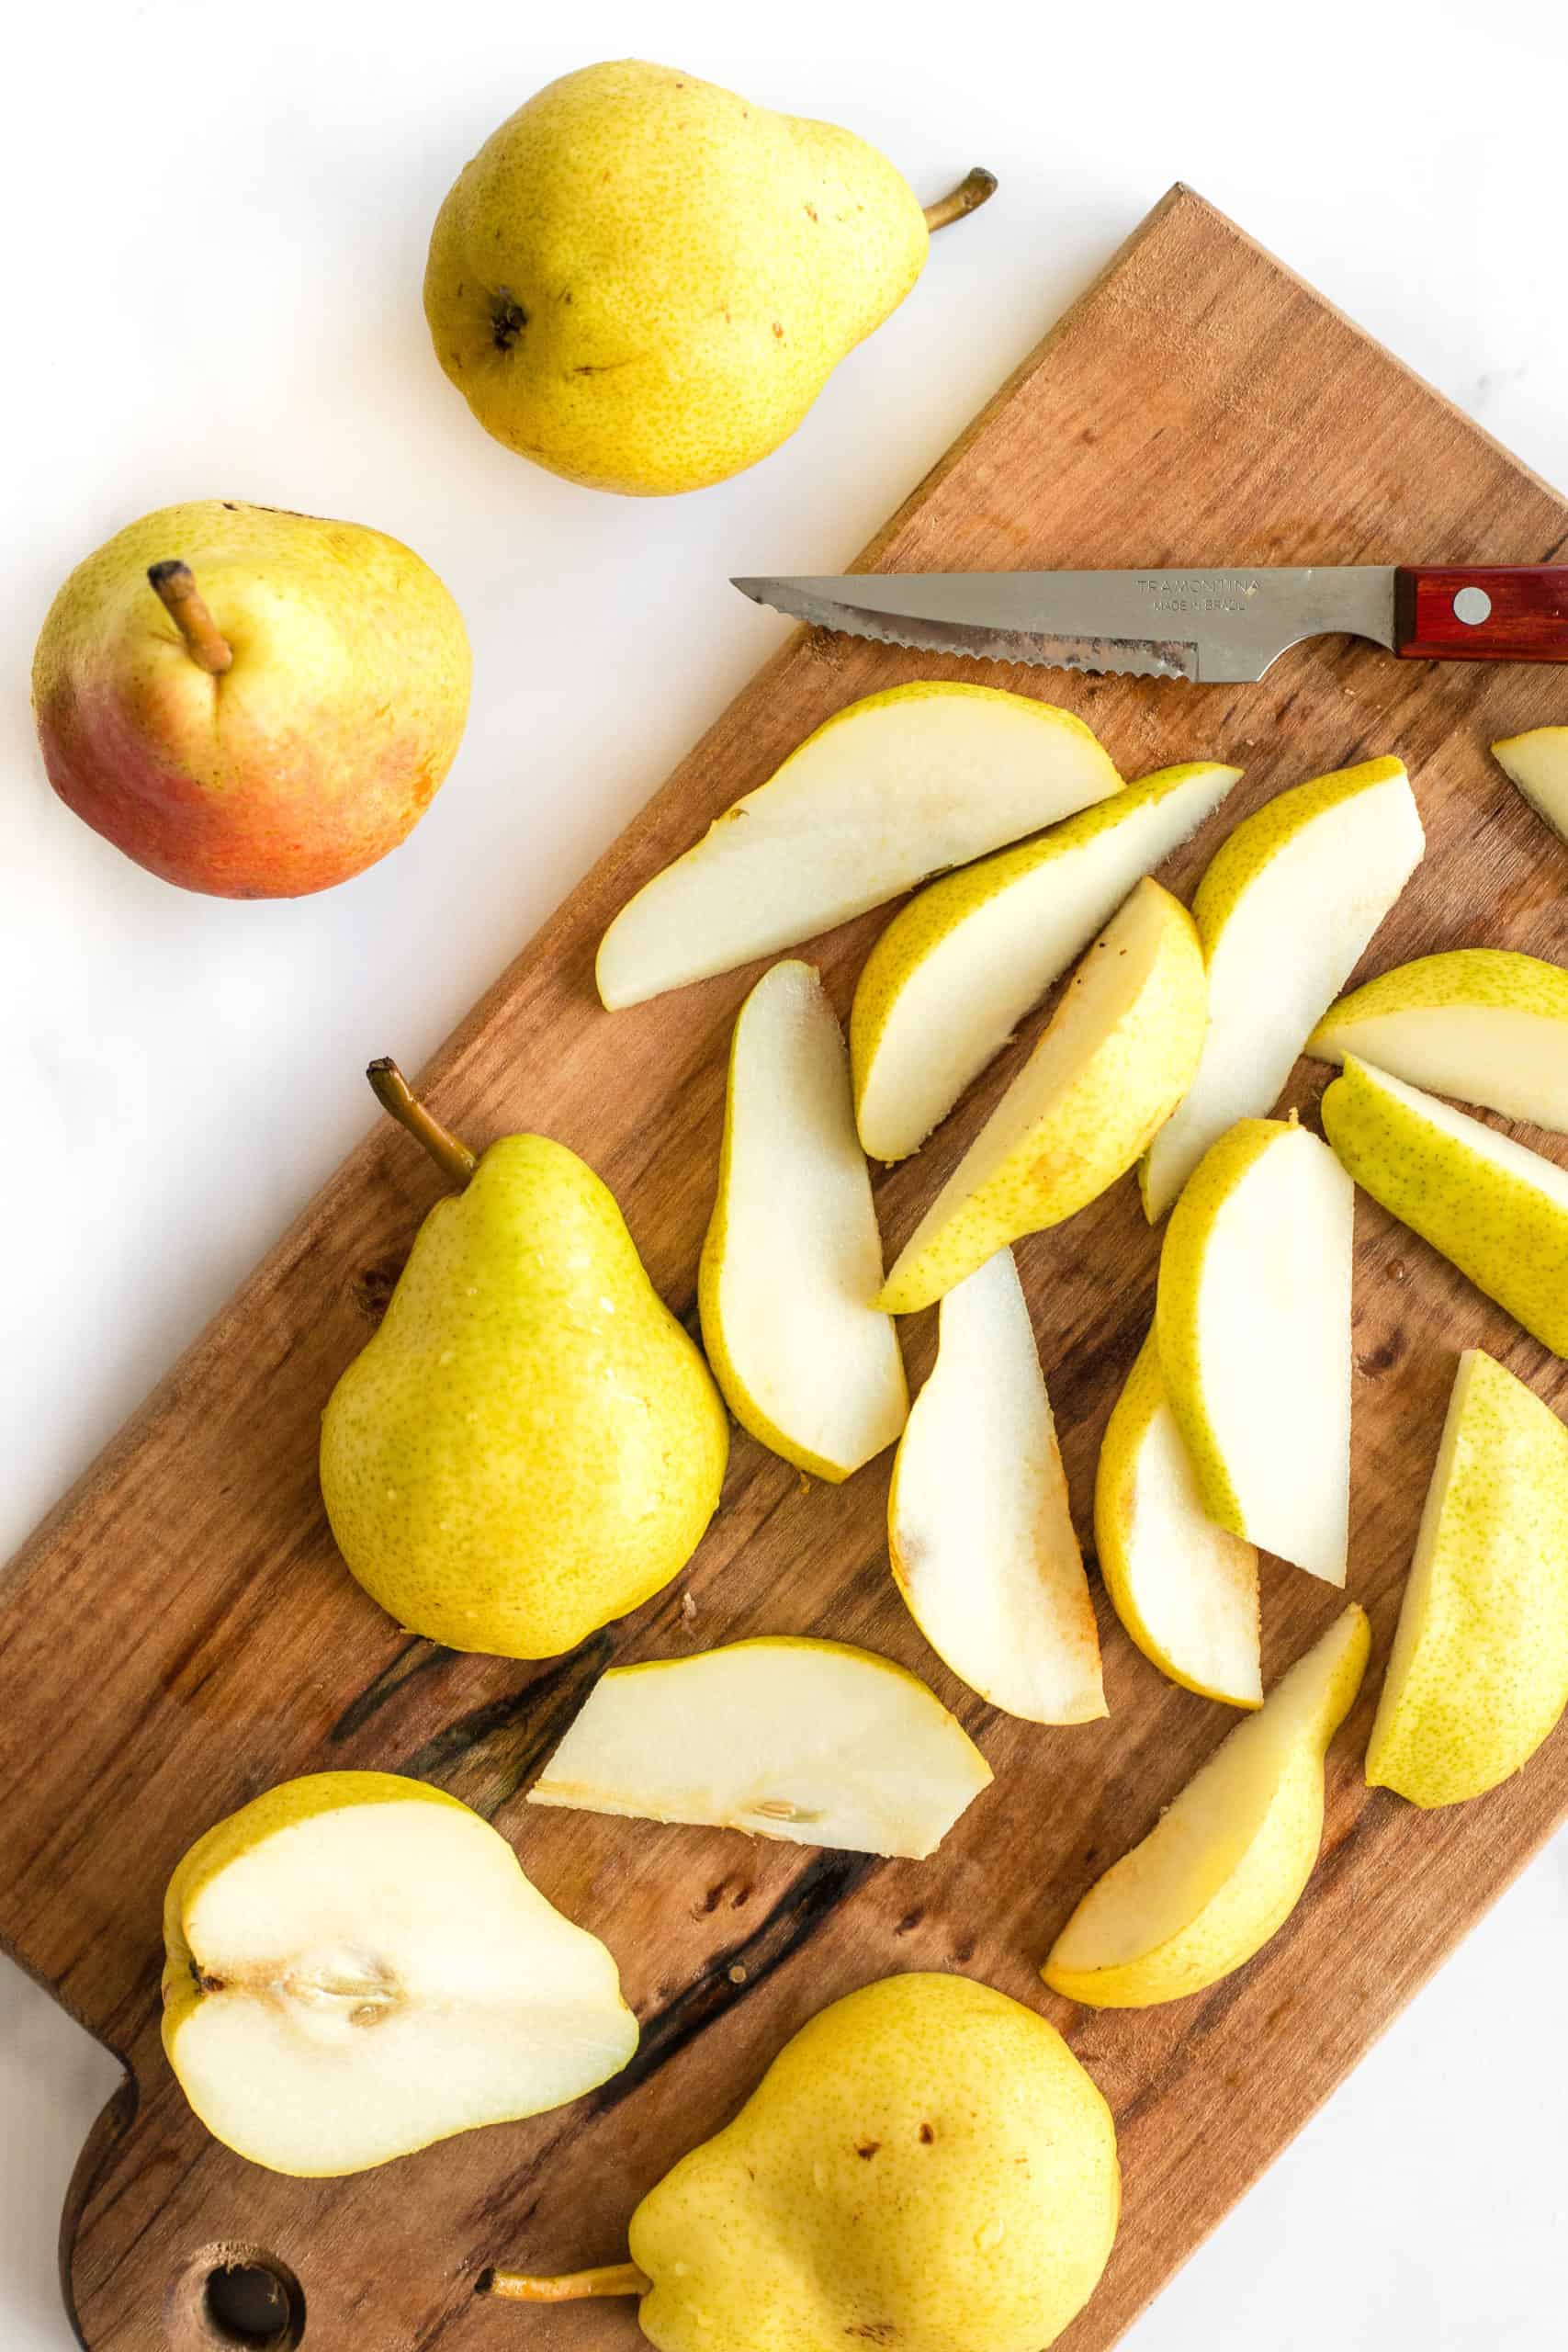 Pears sliced on a wooden board